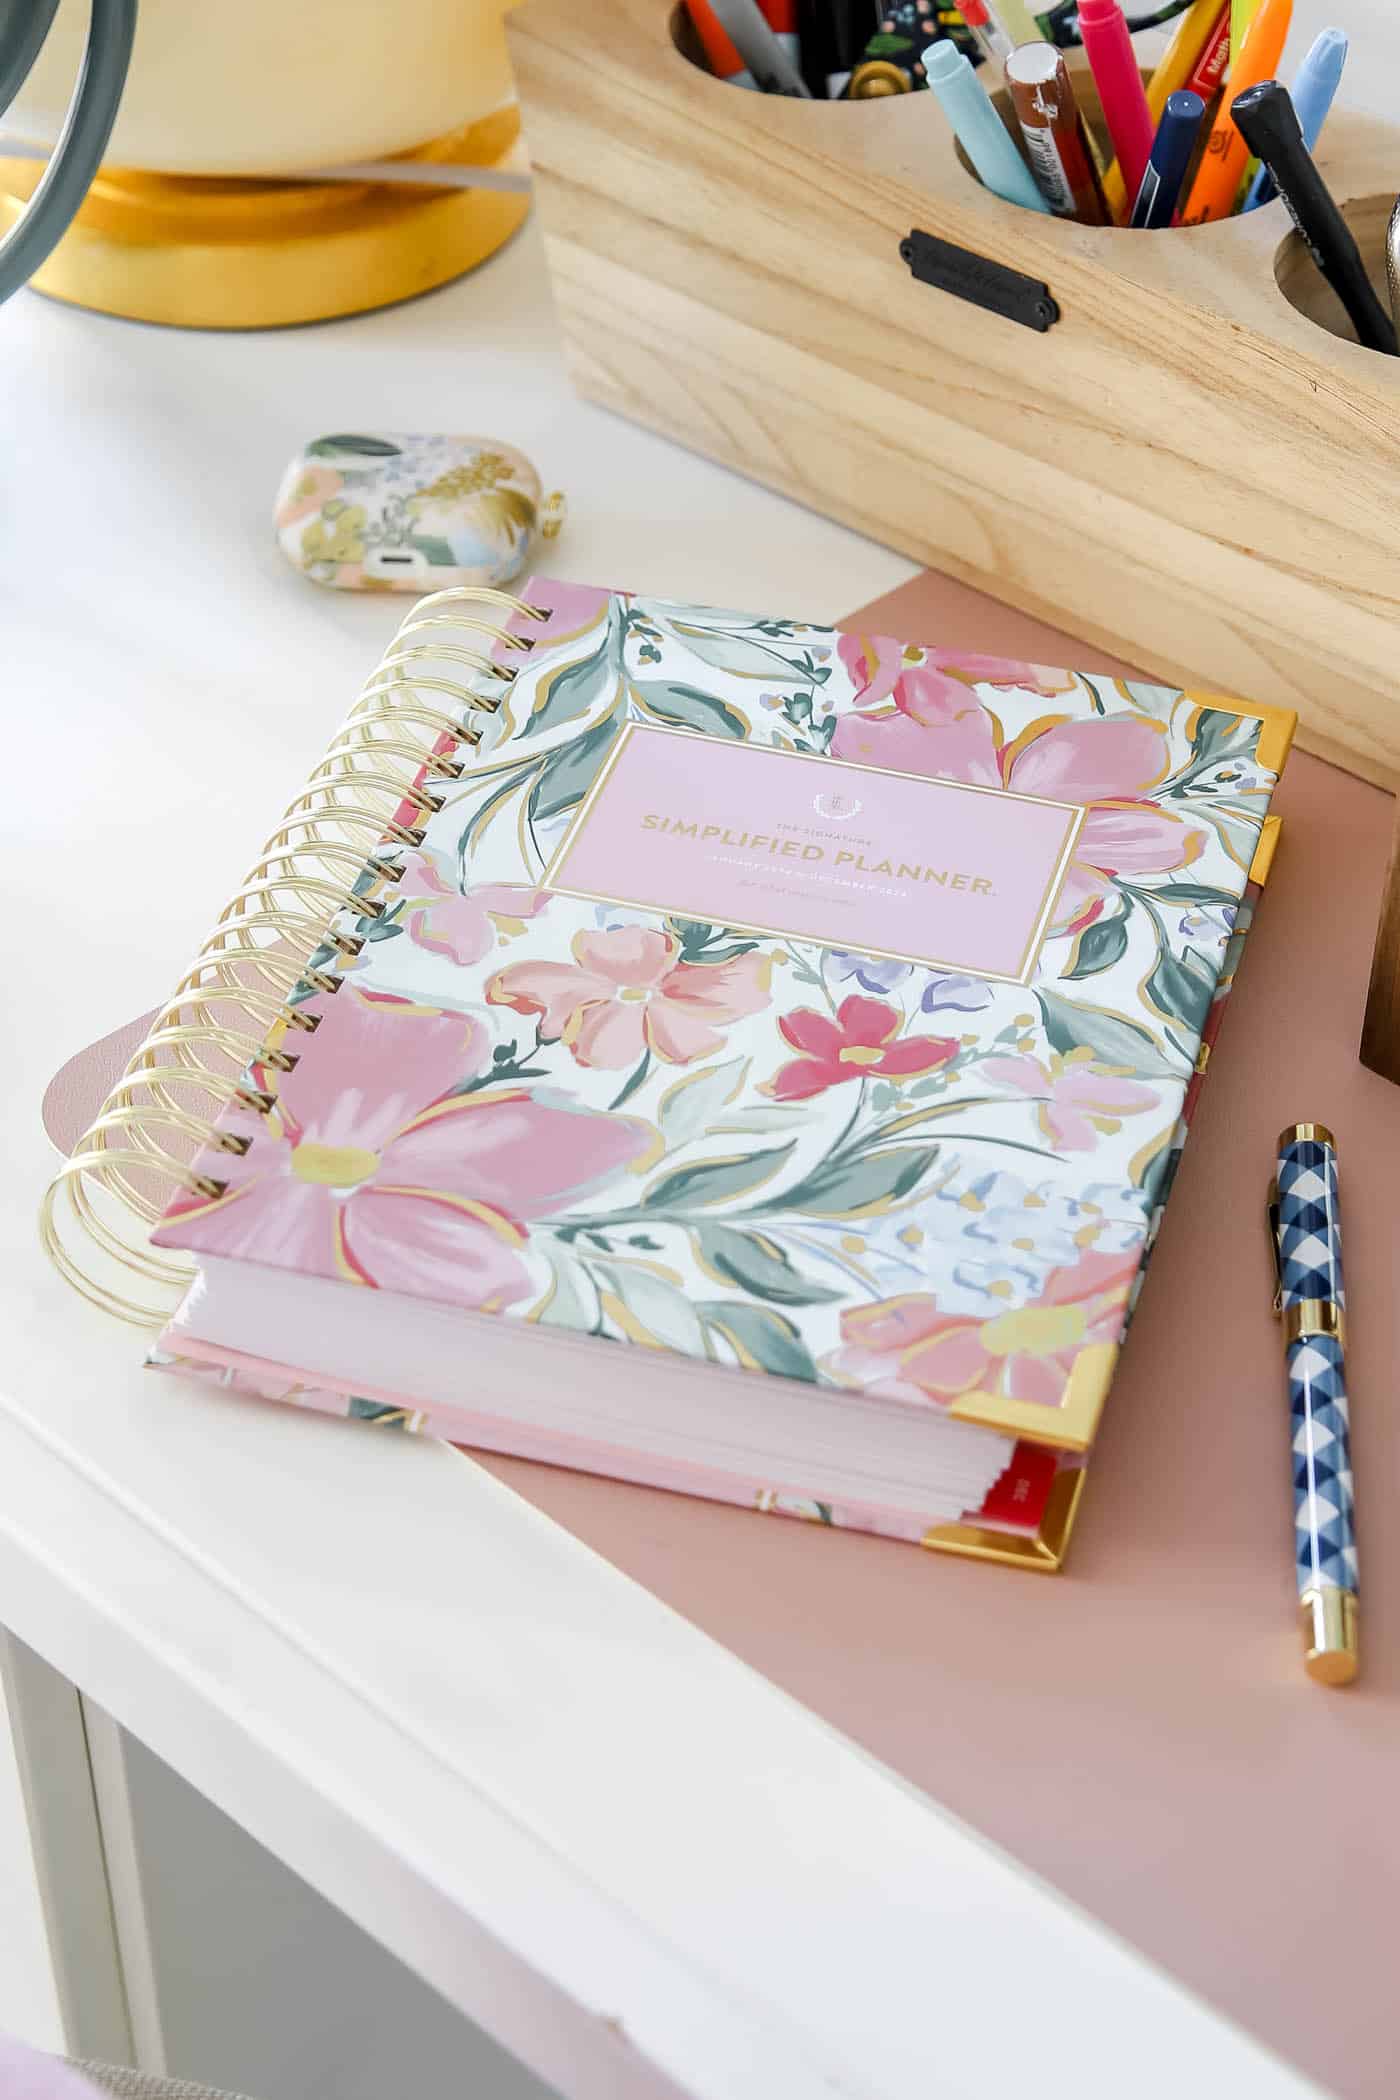 Blush Magnolia Simplified Planner by Emily Ley